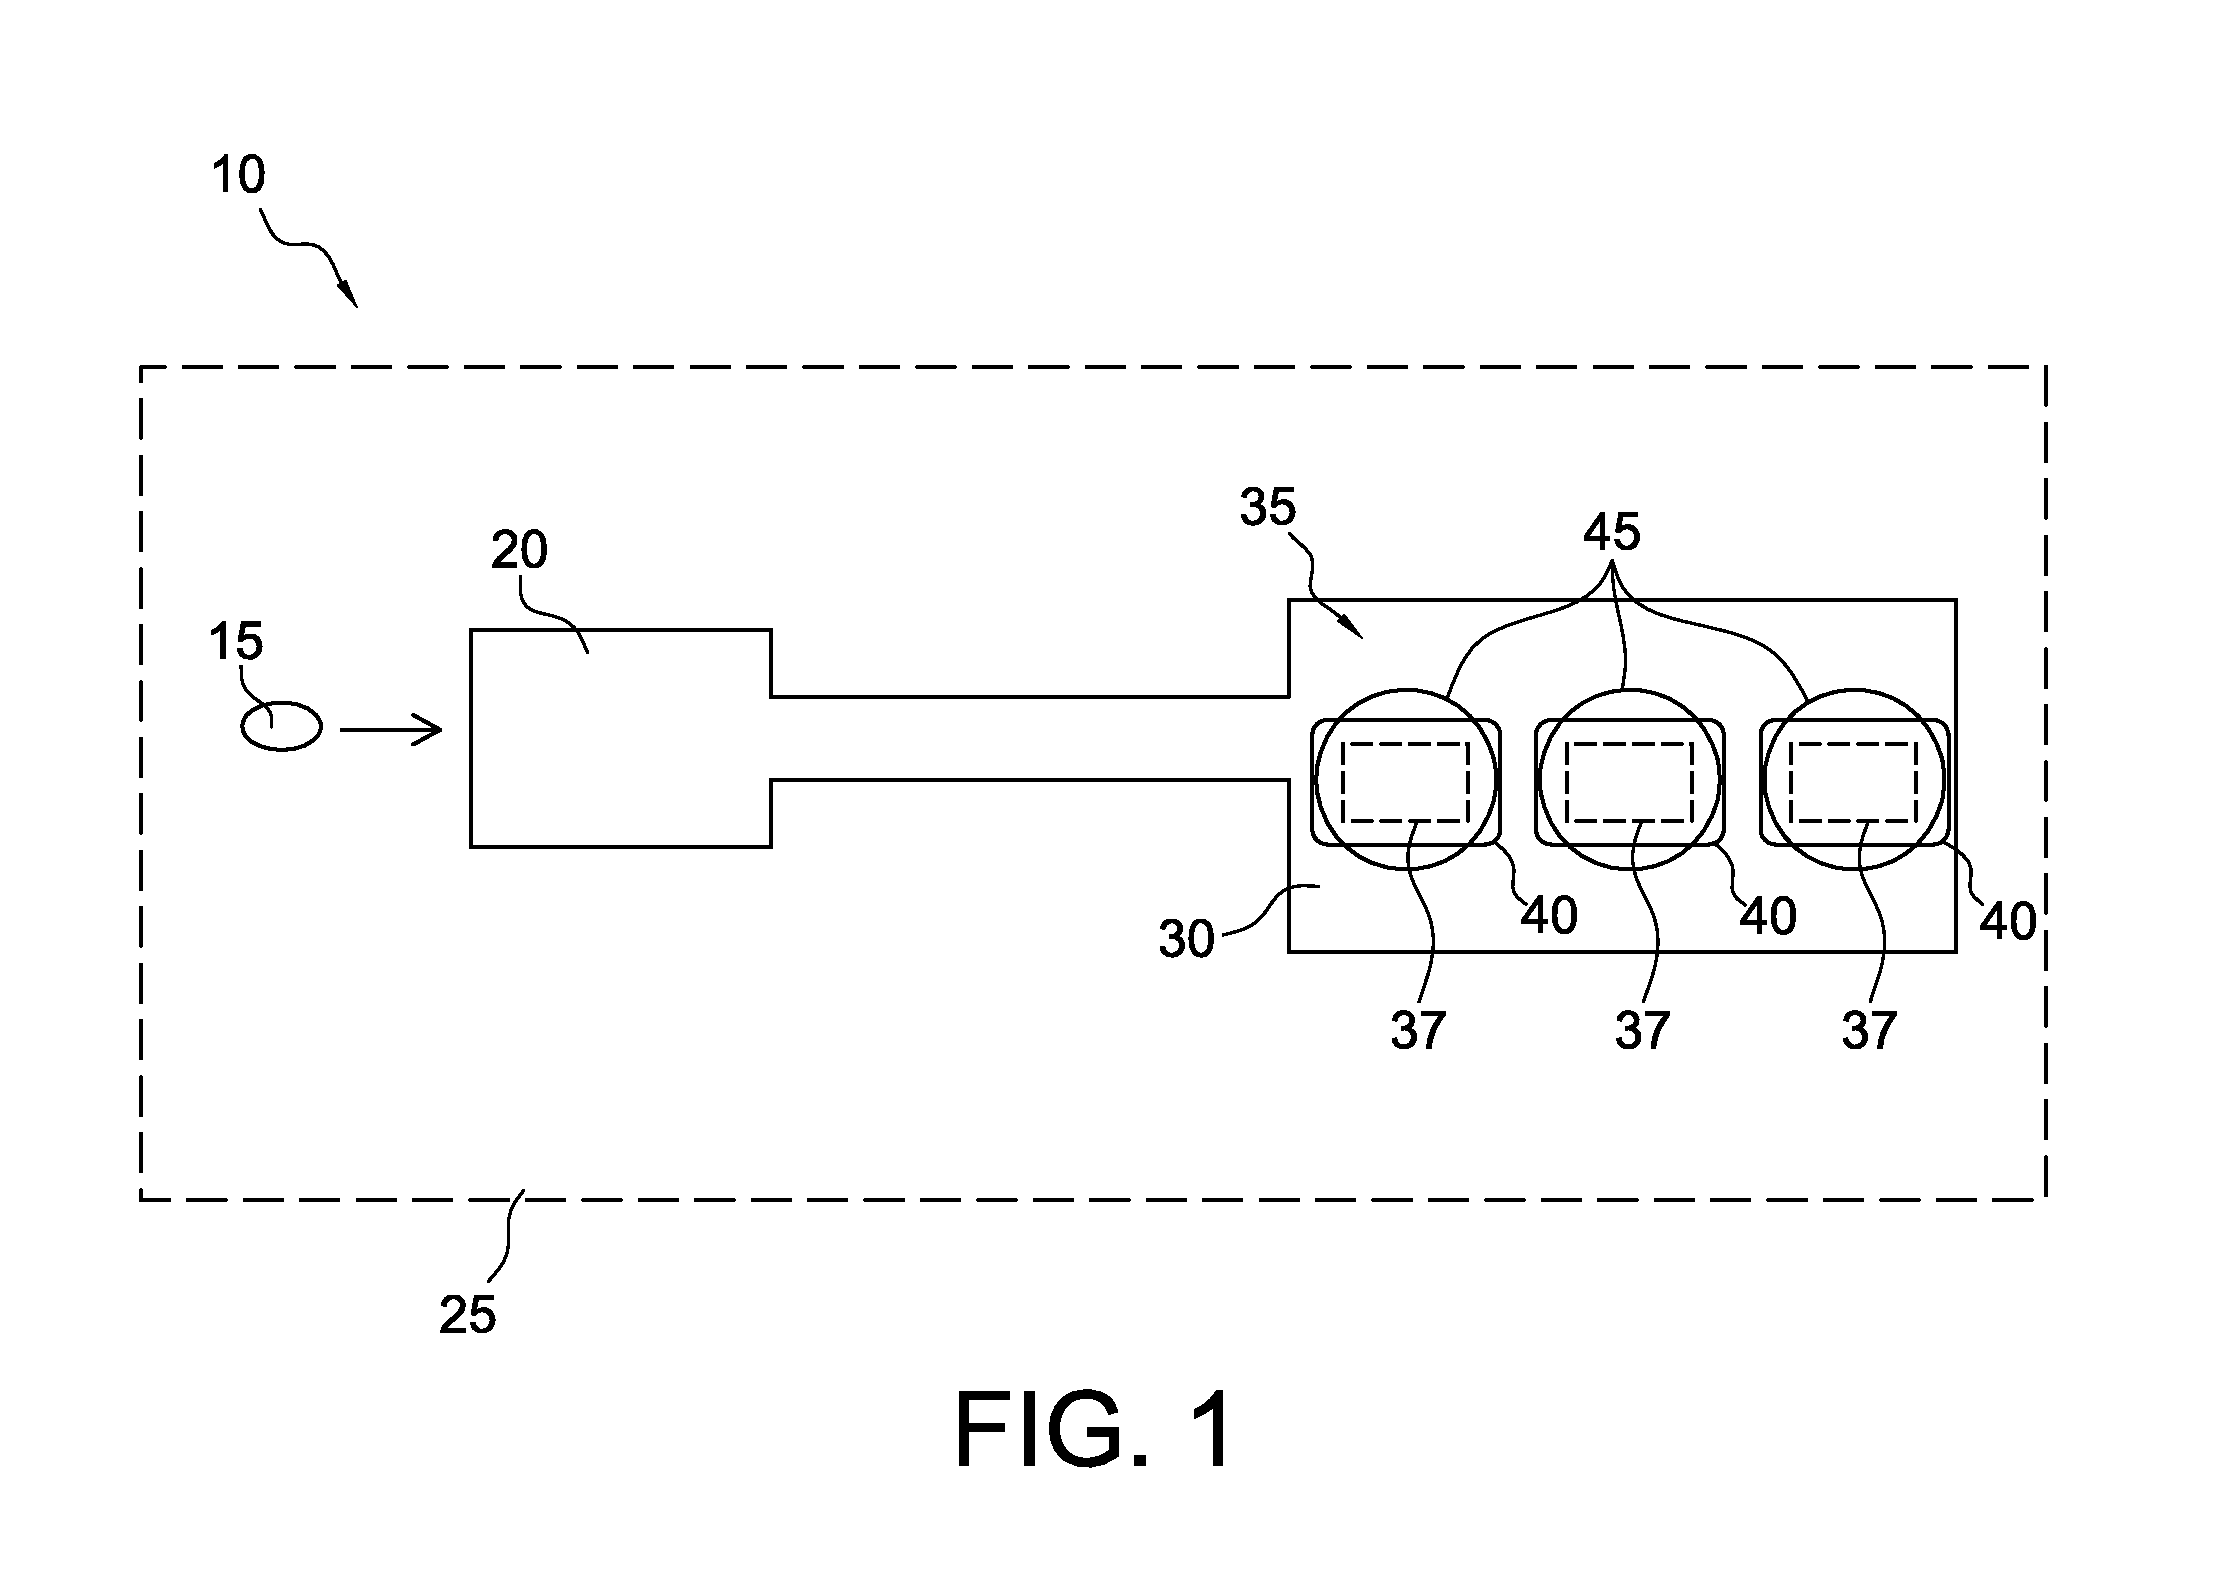 Cartridge device with segmented fluidics for assaying coagulation in fluid samples